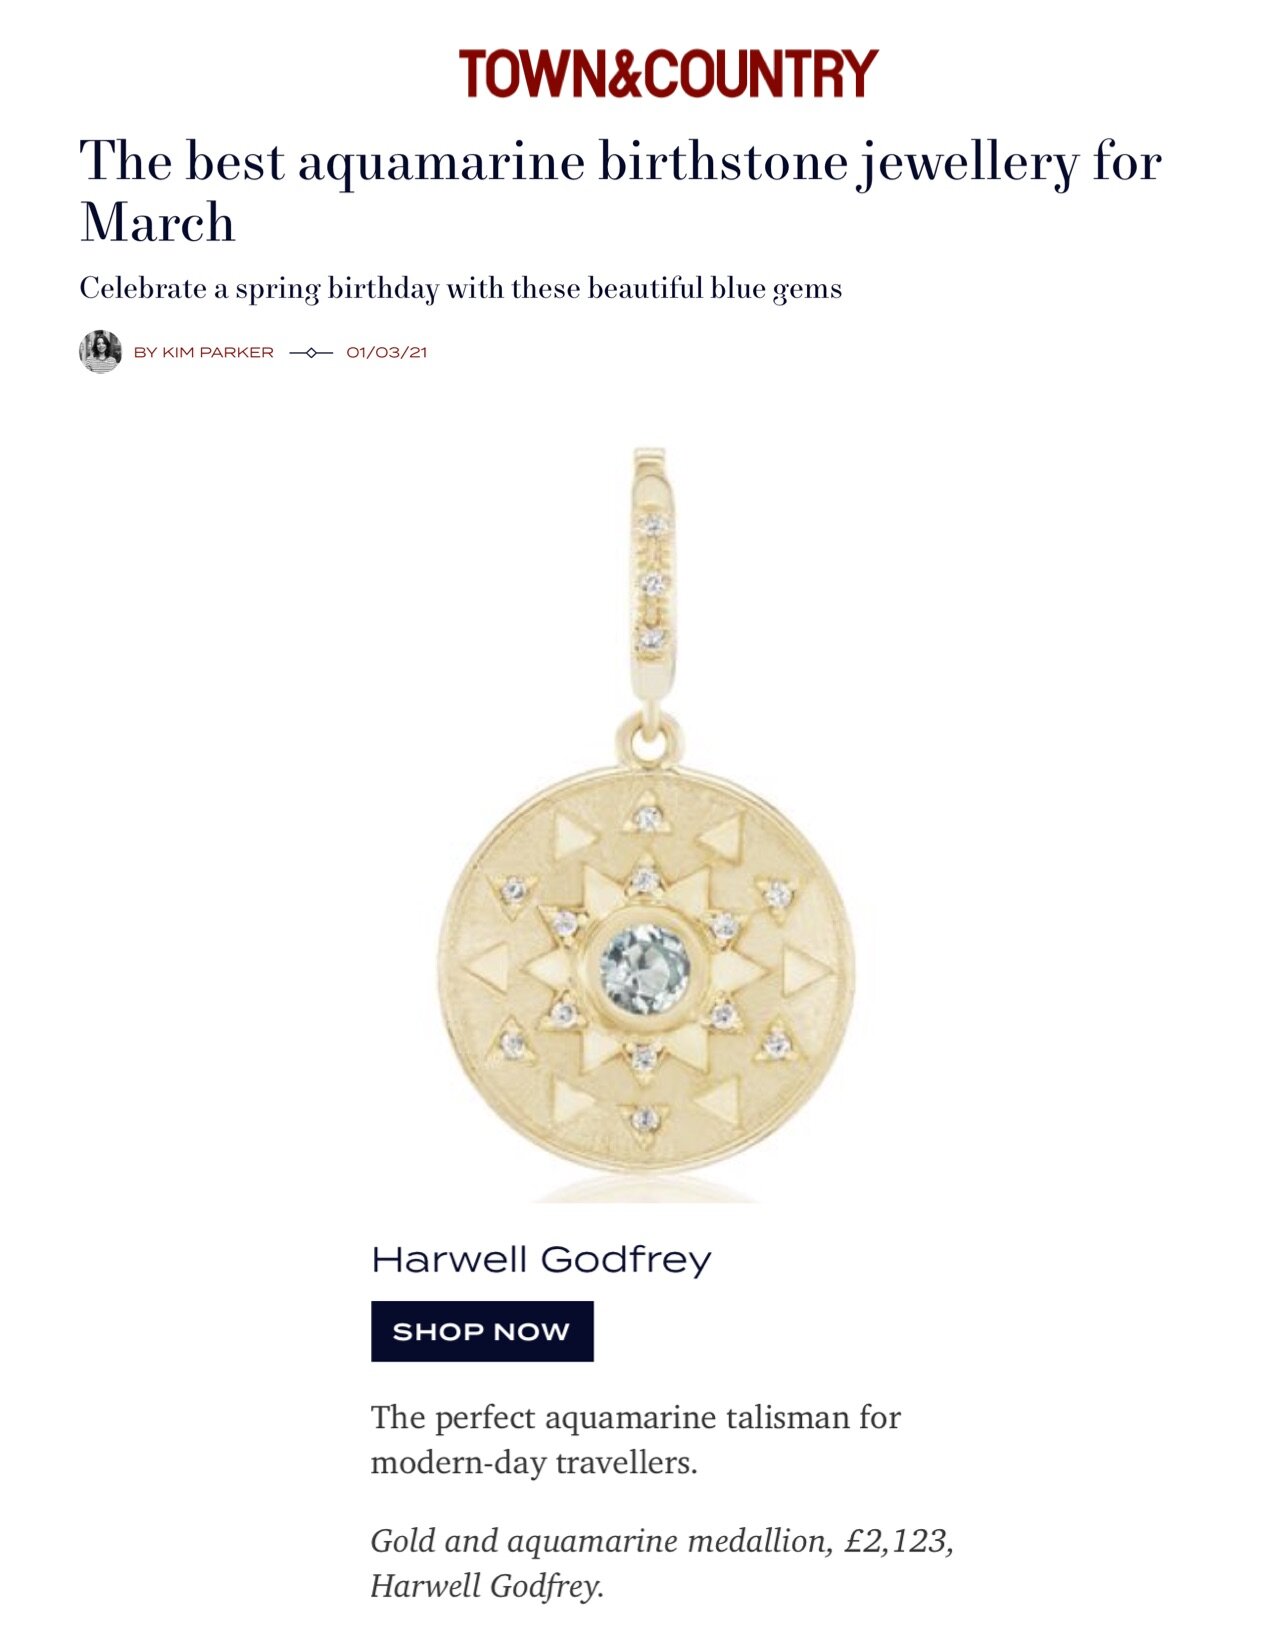 Harwell Godfrey on TownandCountry.co.uk, March 2021